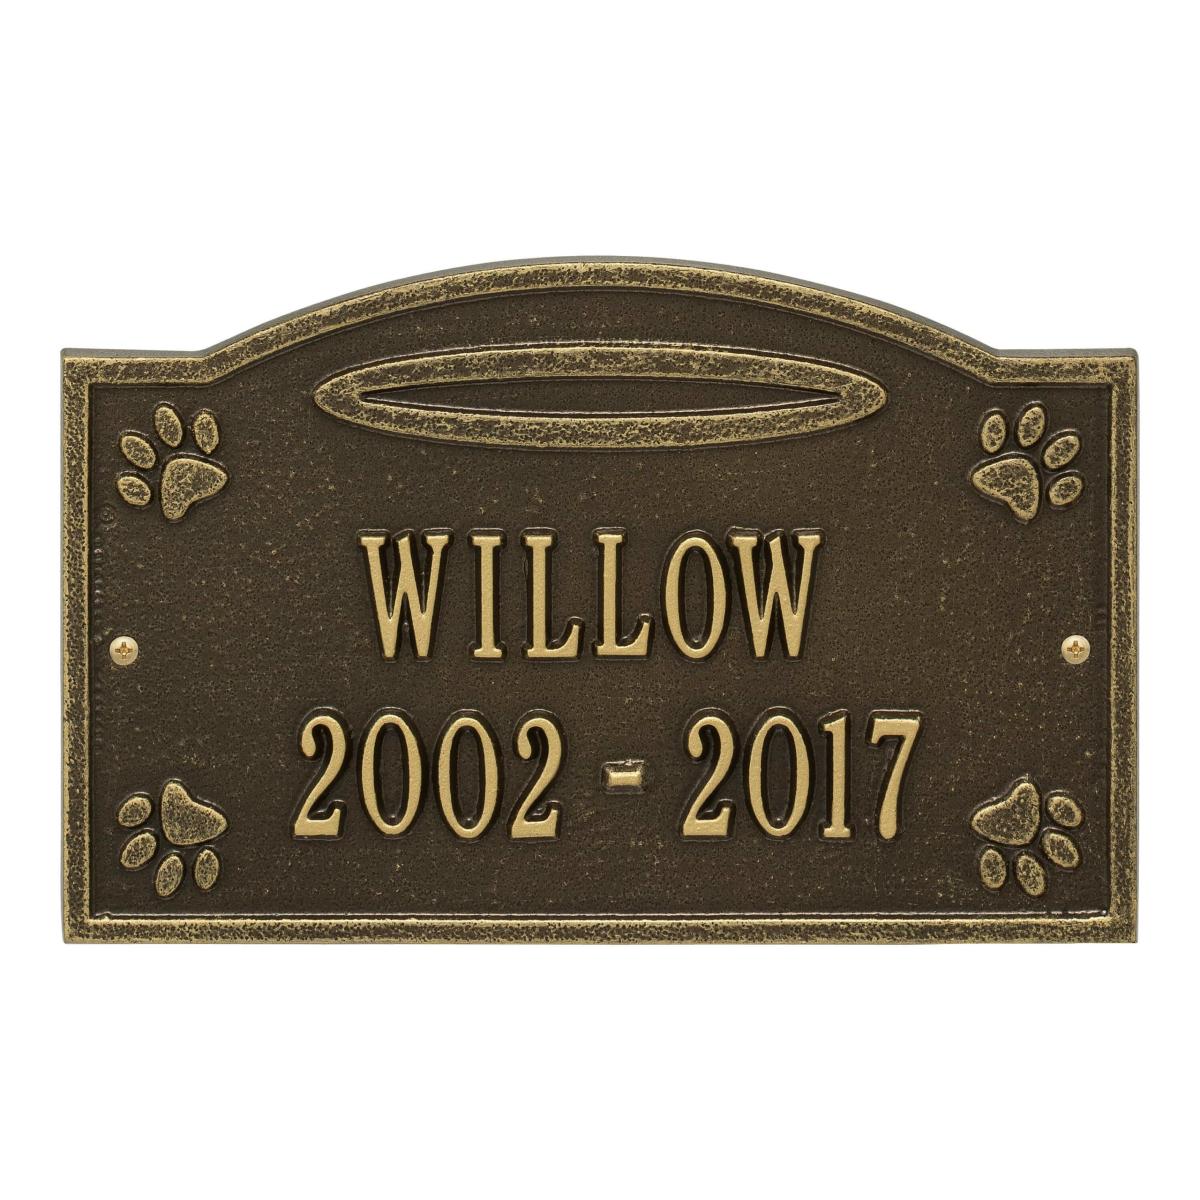 Ground antique brass plaque finish with image of pet paws and dates